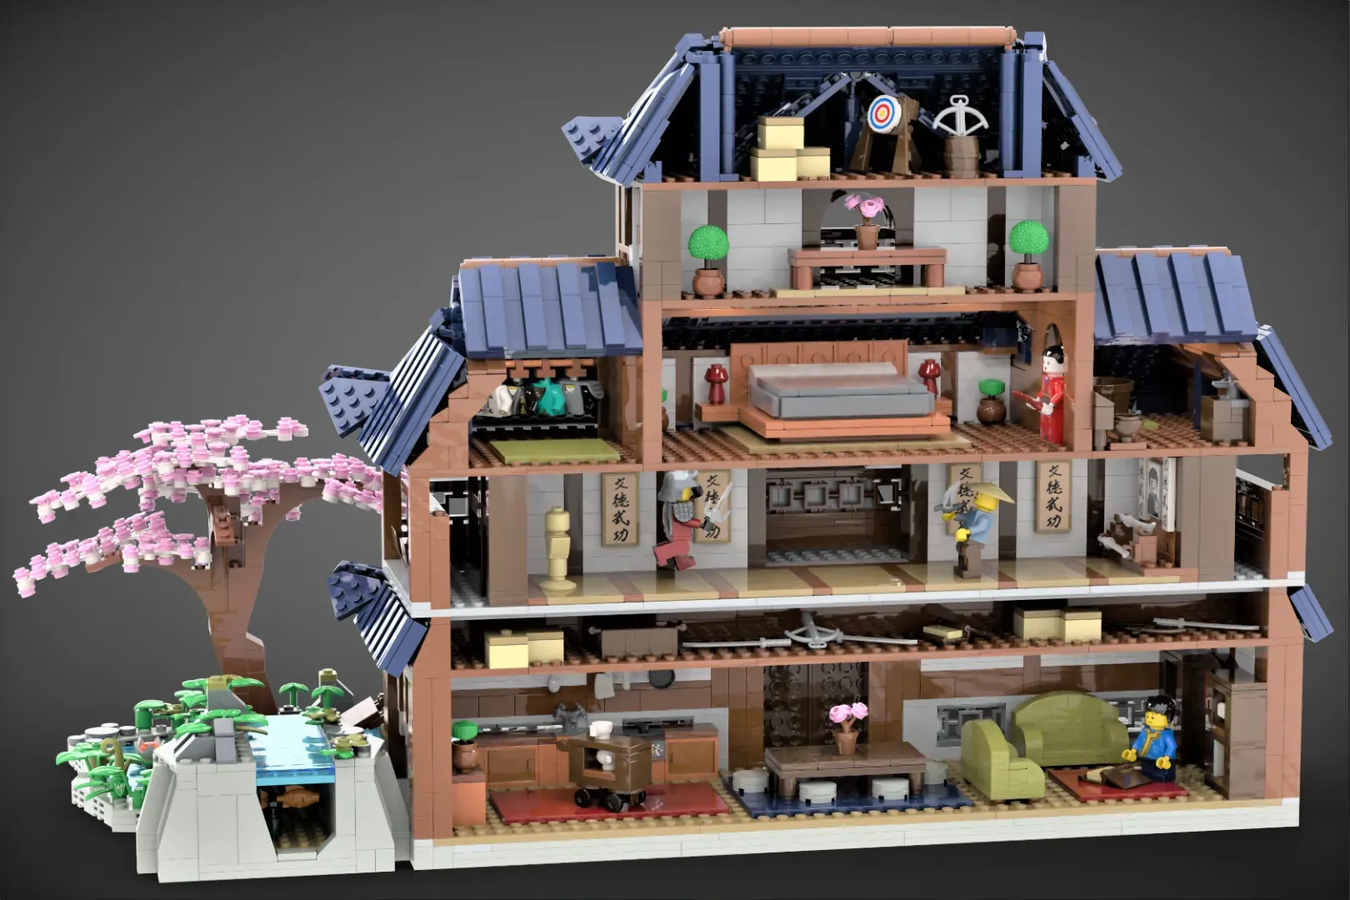 Japanese Castle earns 10,000 supporters on LEGO Ideas